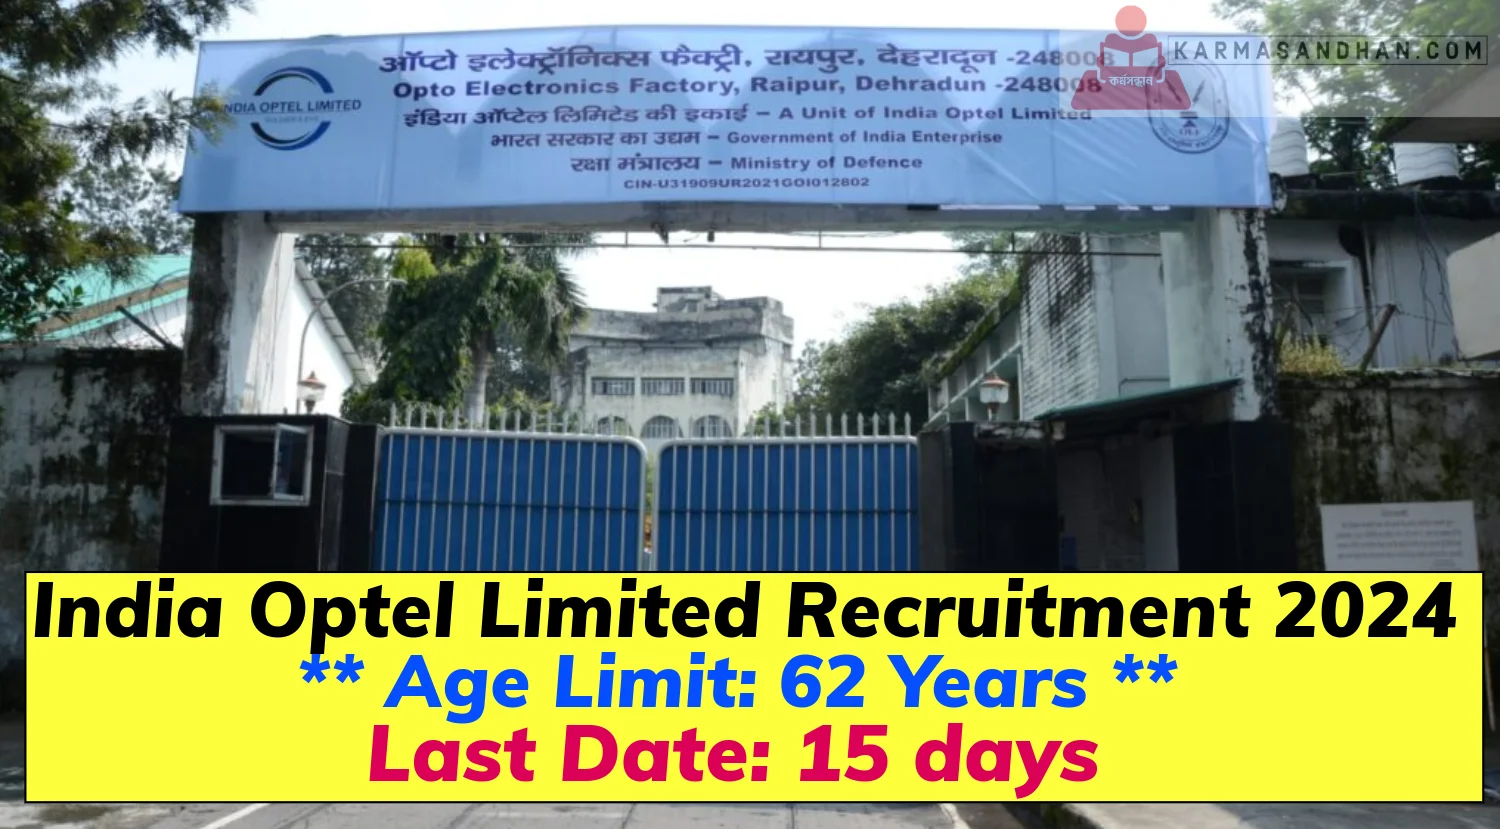 India Optel Limited Recruitment 2024